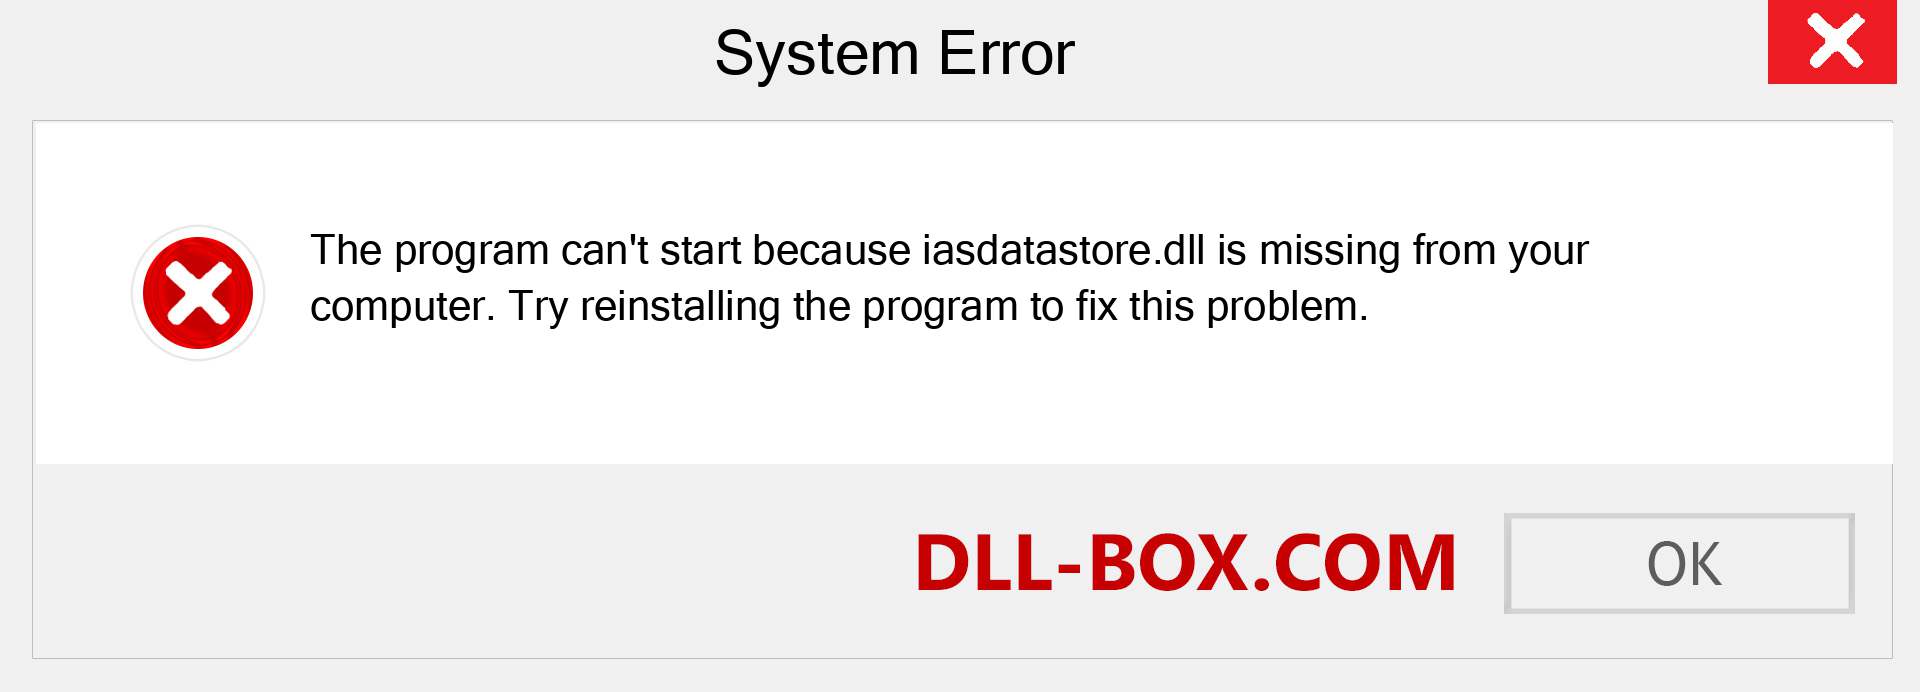  iasdatastore.dll file is missing?. Download for Windows 7, 8, 10 - Fix  iasdatastore dll Missing Error on Windows, photos, images